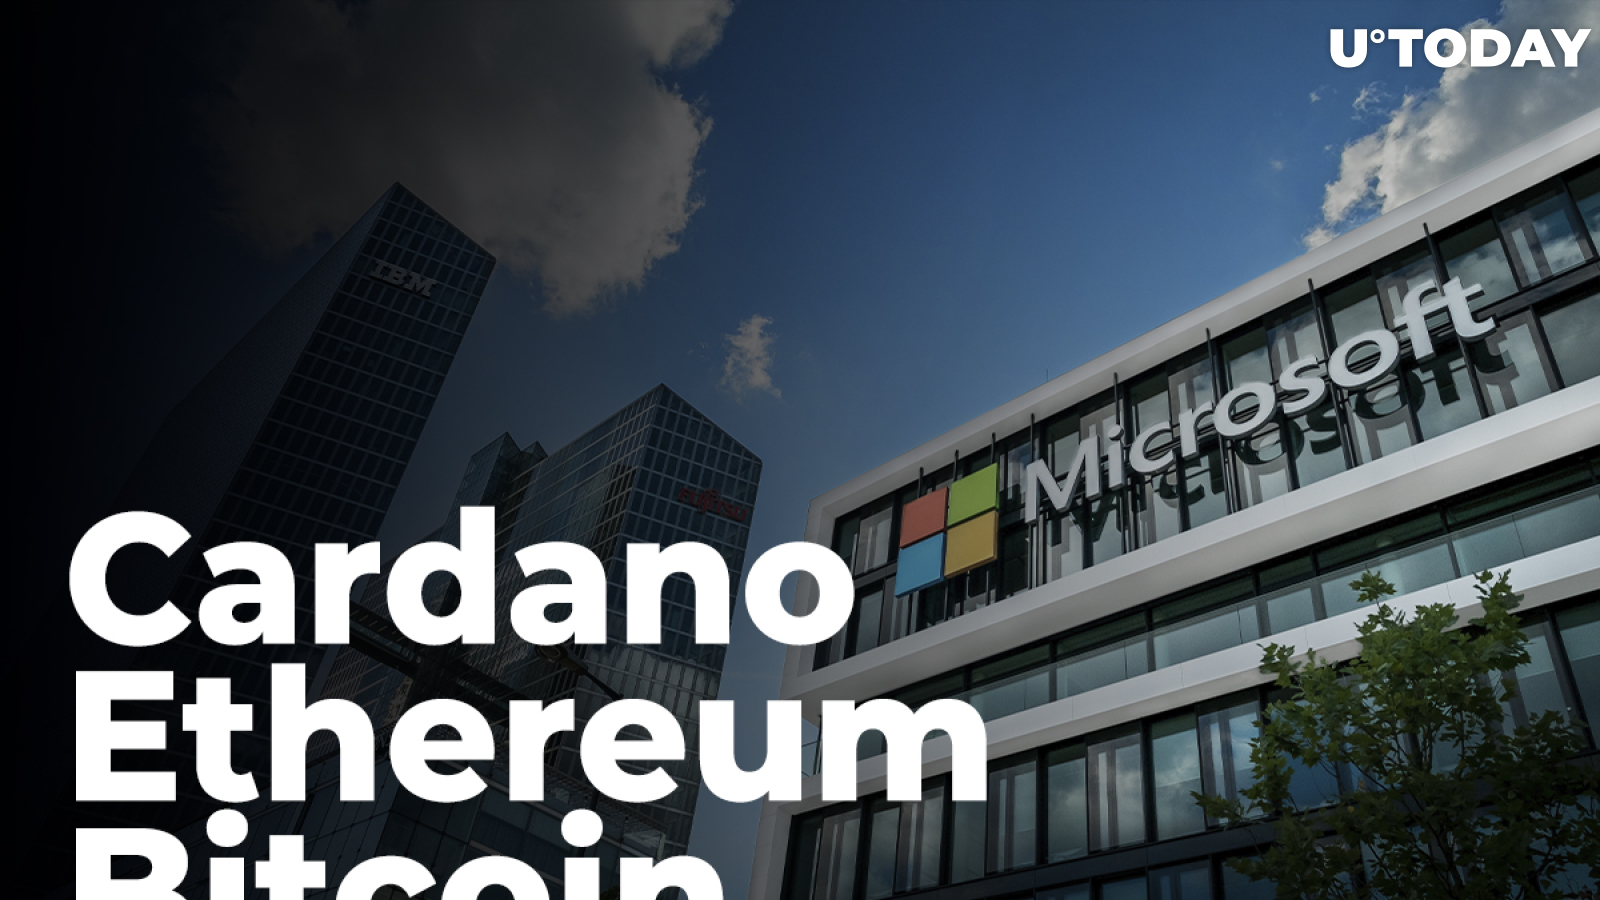 Peter Brandt Suggests That Cardano, Ethereum and Bitcoin Could Follow Microsoft's Path